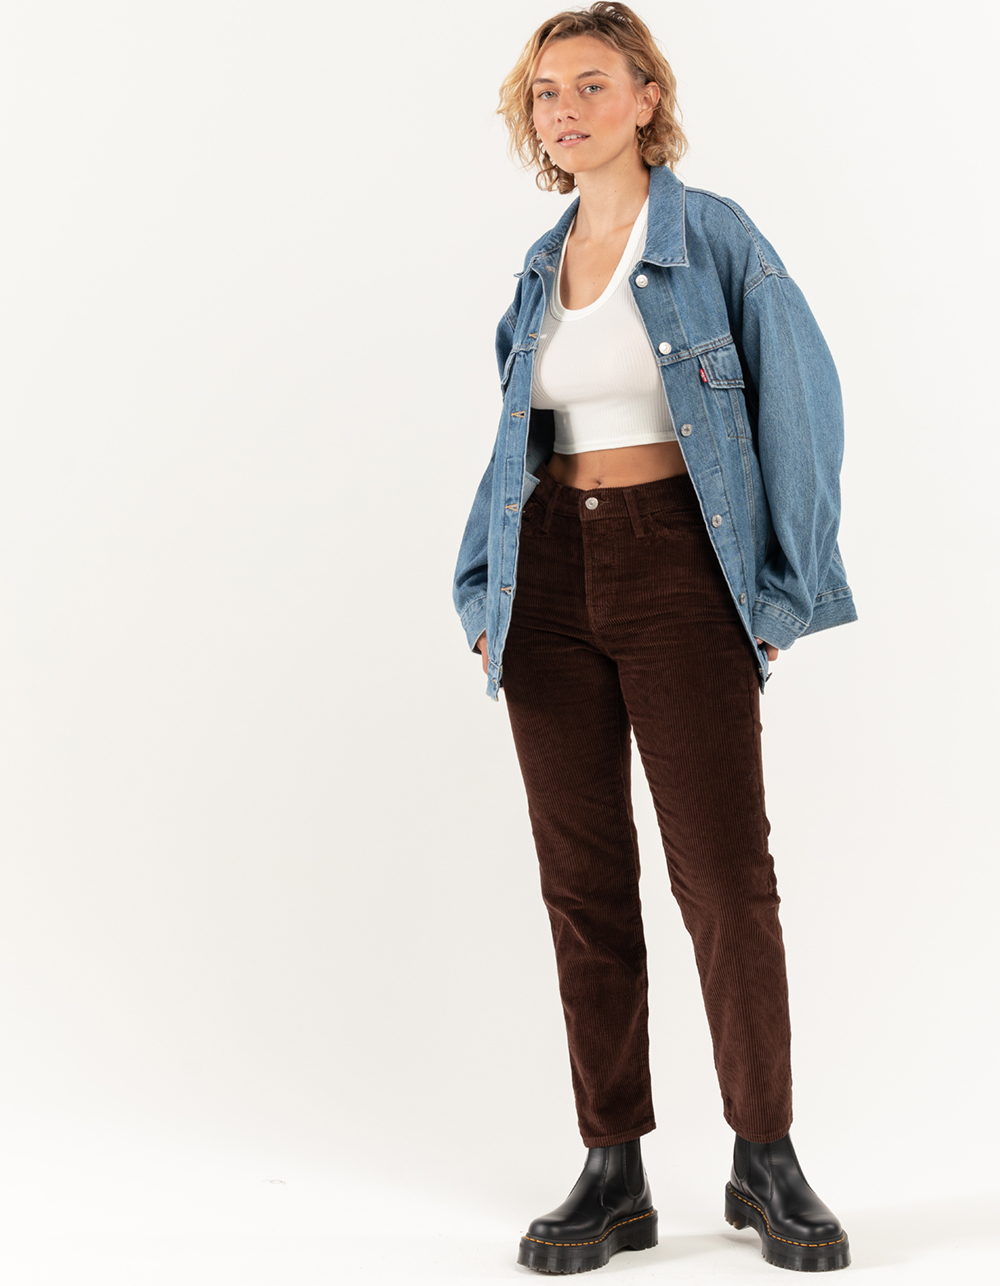 LEVI'S Womens Wedgie Straight Cord Pants - COFFEE | Tillys